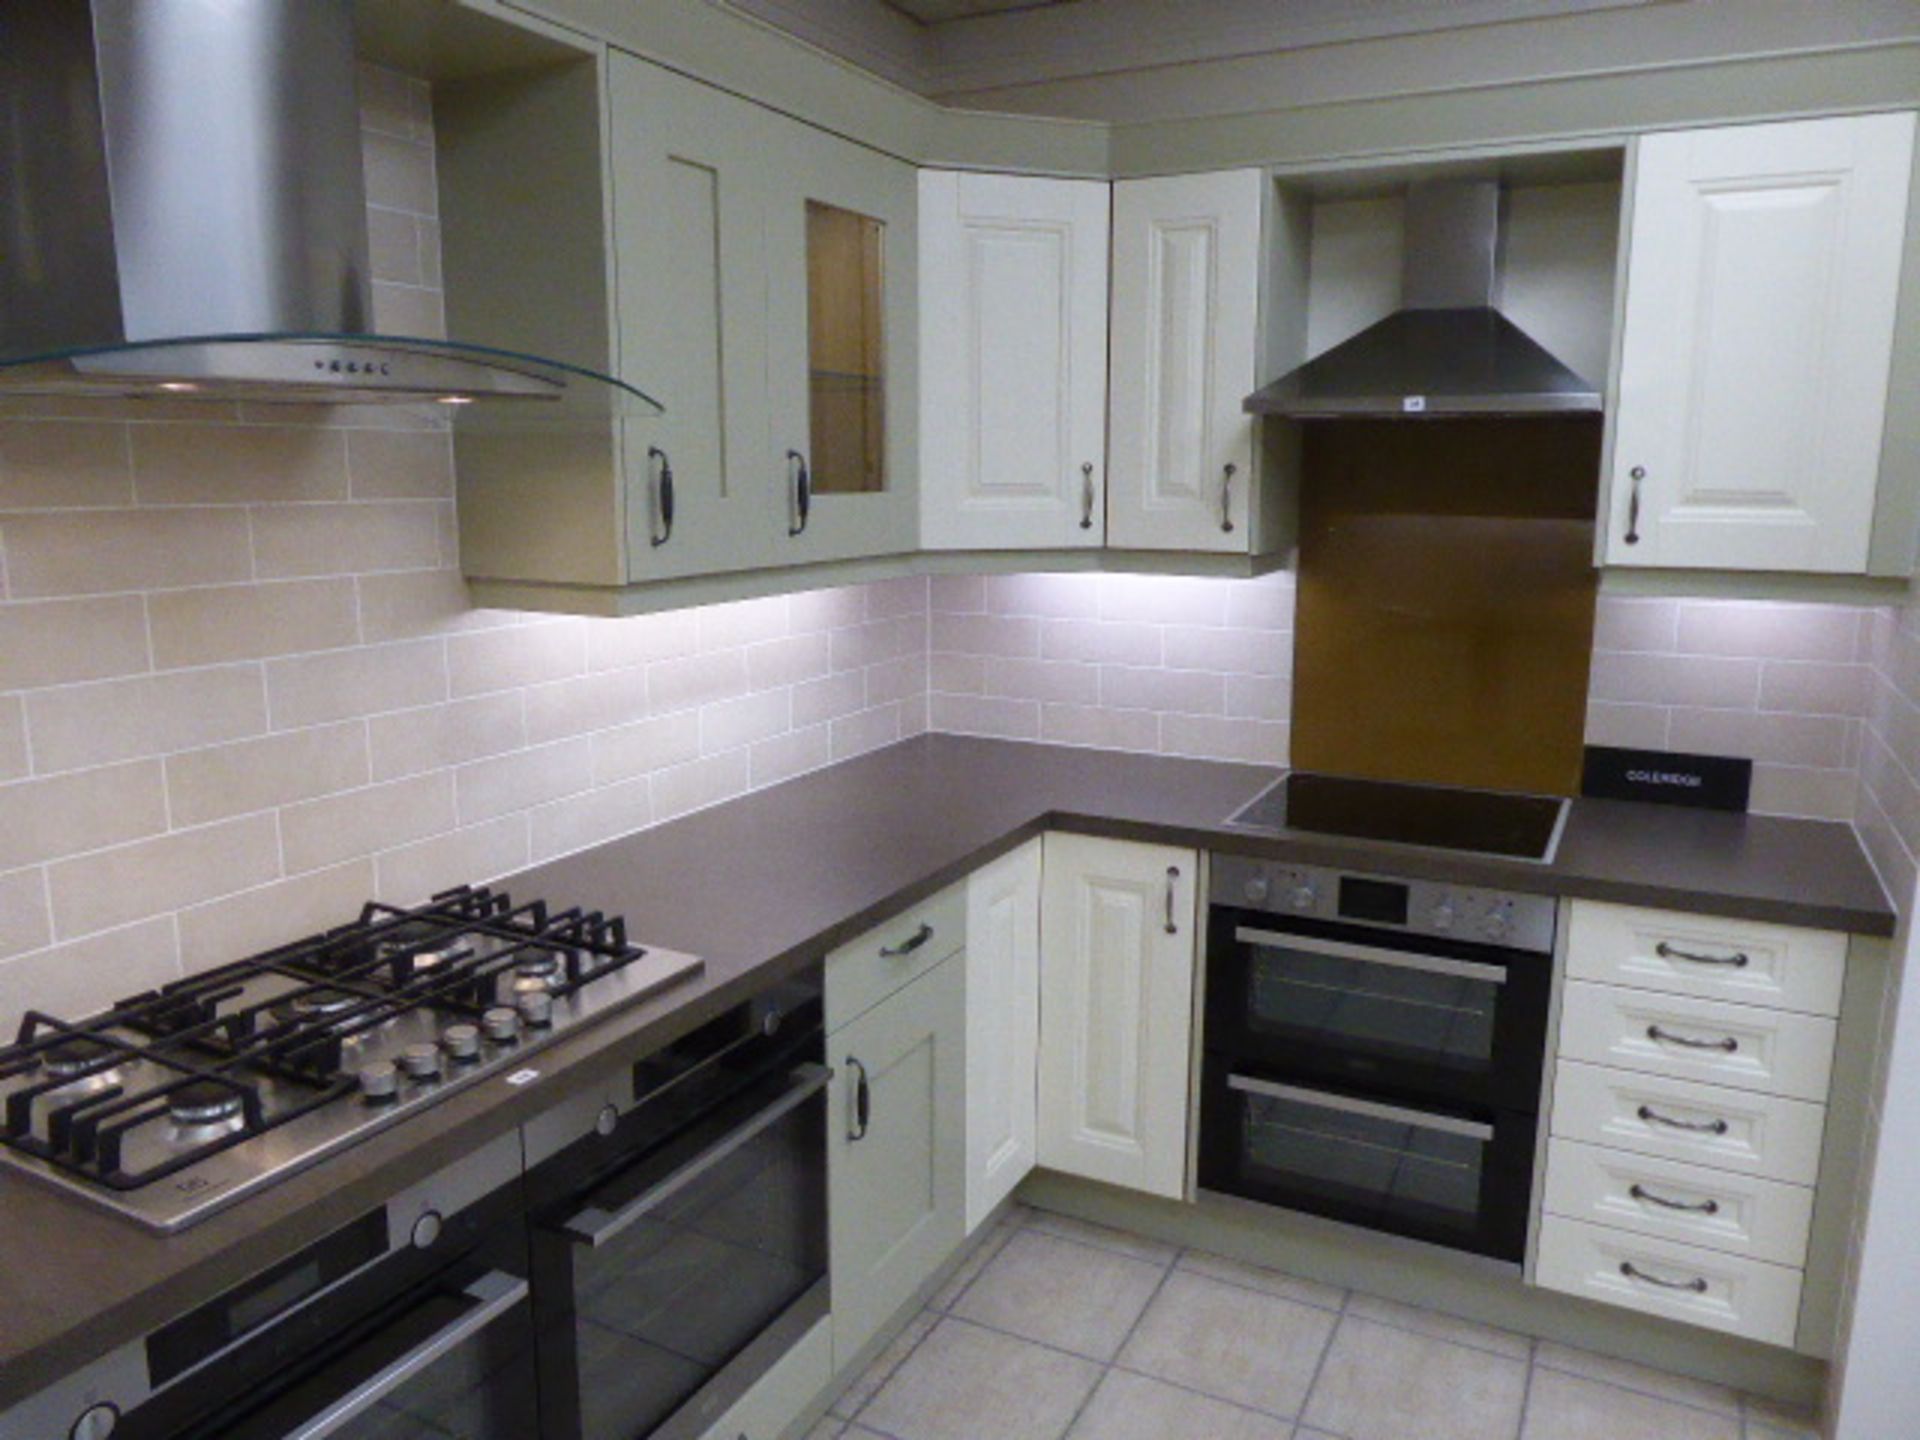 Coleridge and Milbourne sage kitchen with sand stone effect laminate worktops. Max measurement is - Image 3 of 14